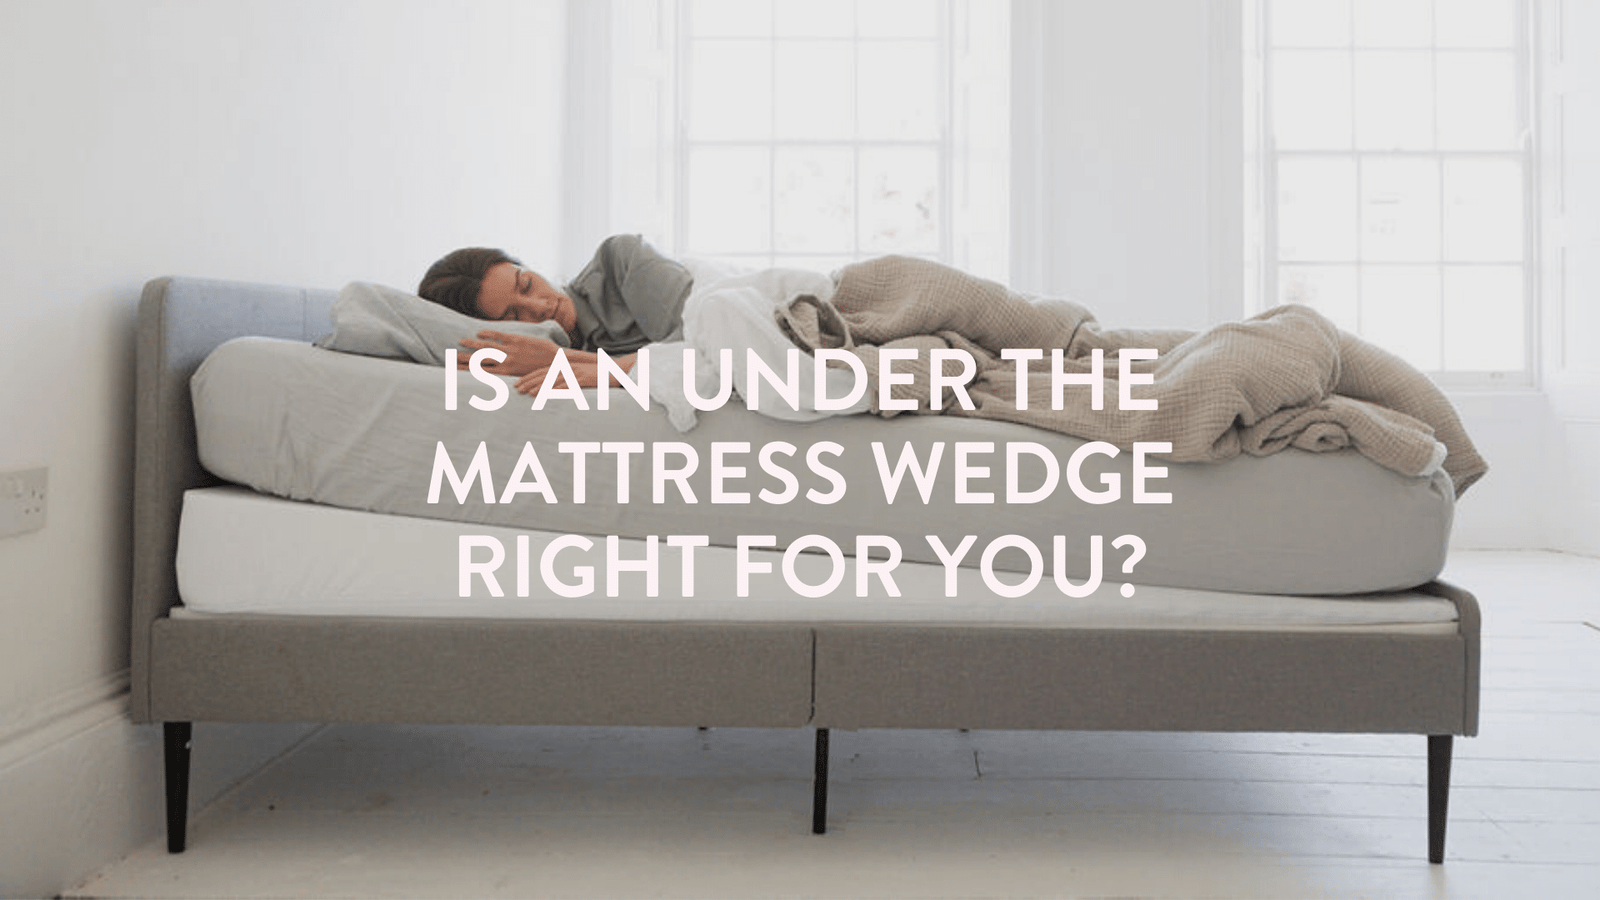 Is an under the mattress wedge right for you?